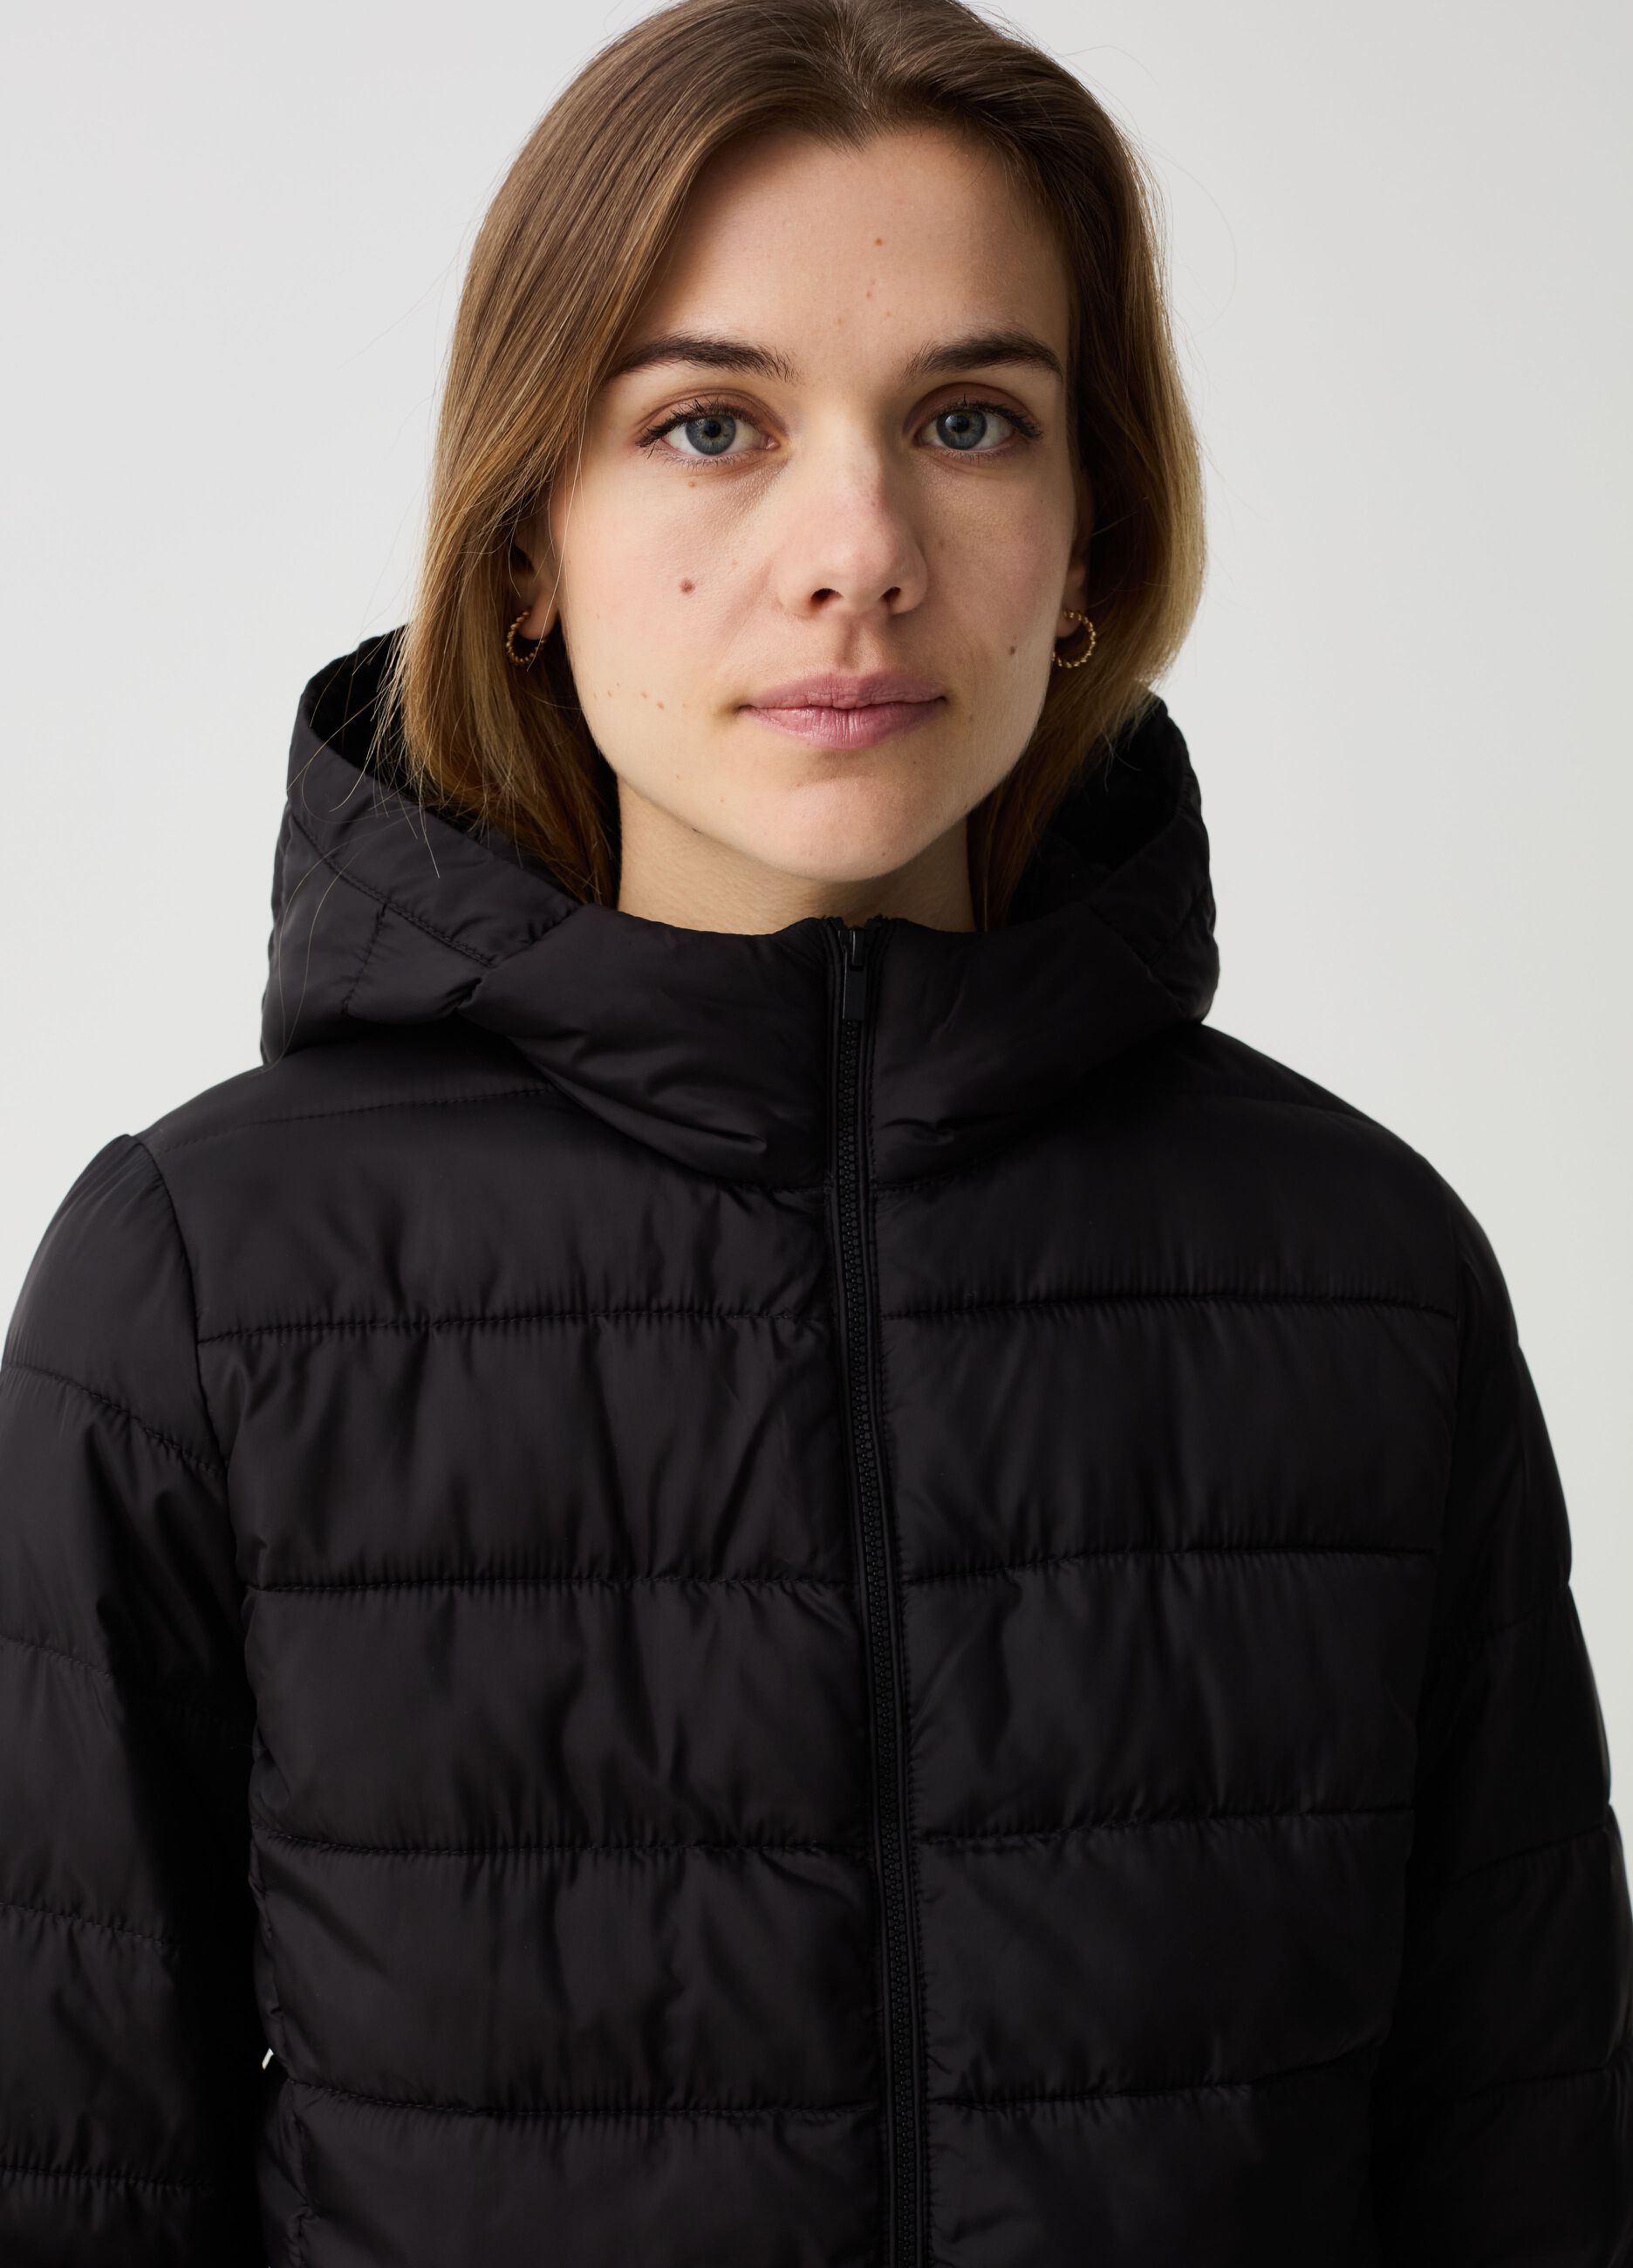 Essential ultralight down jacket with hood